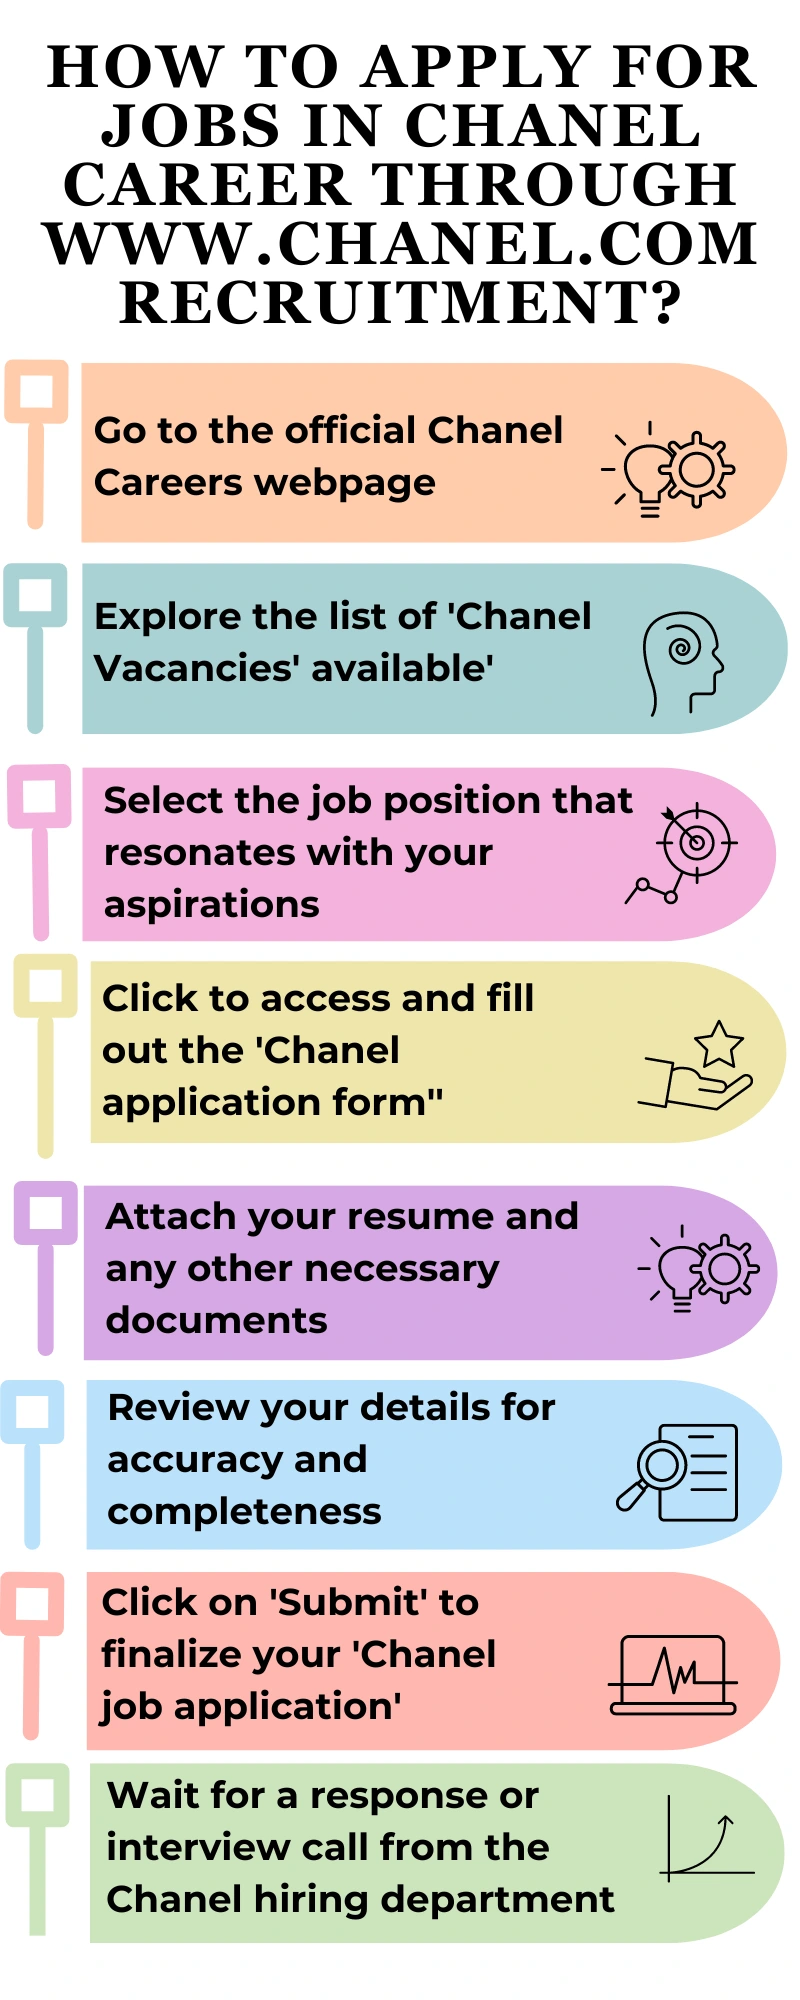 How to Apply for Jobs in Chanel Career through www.chanel.com recruitment?